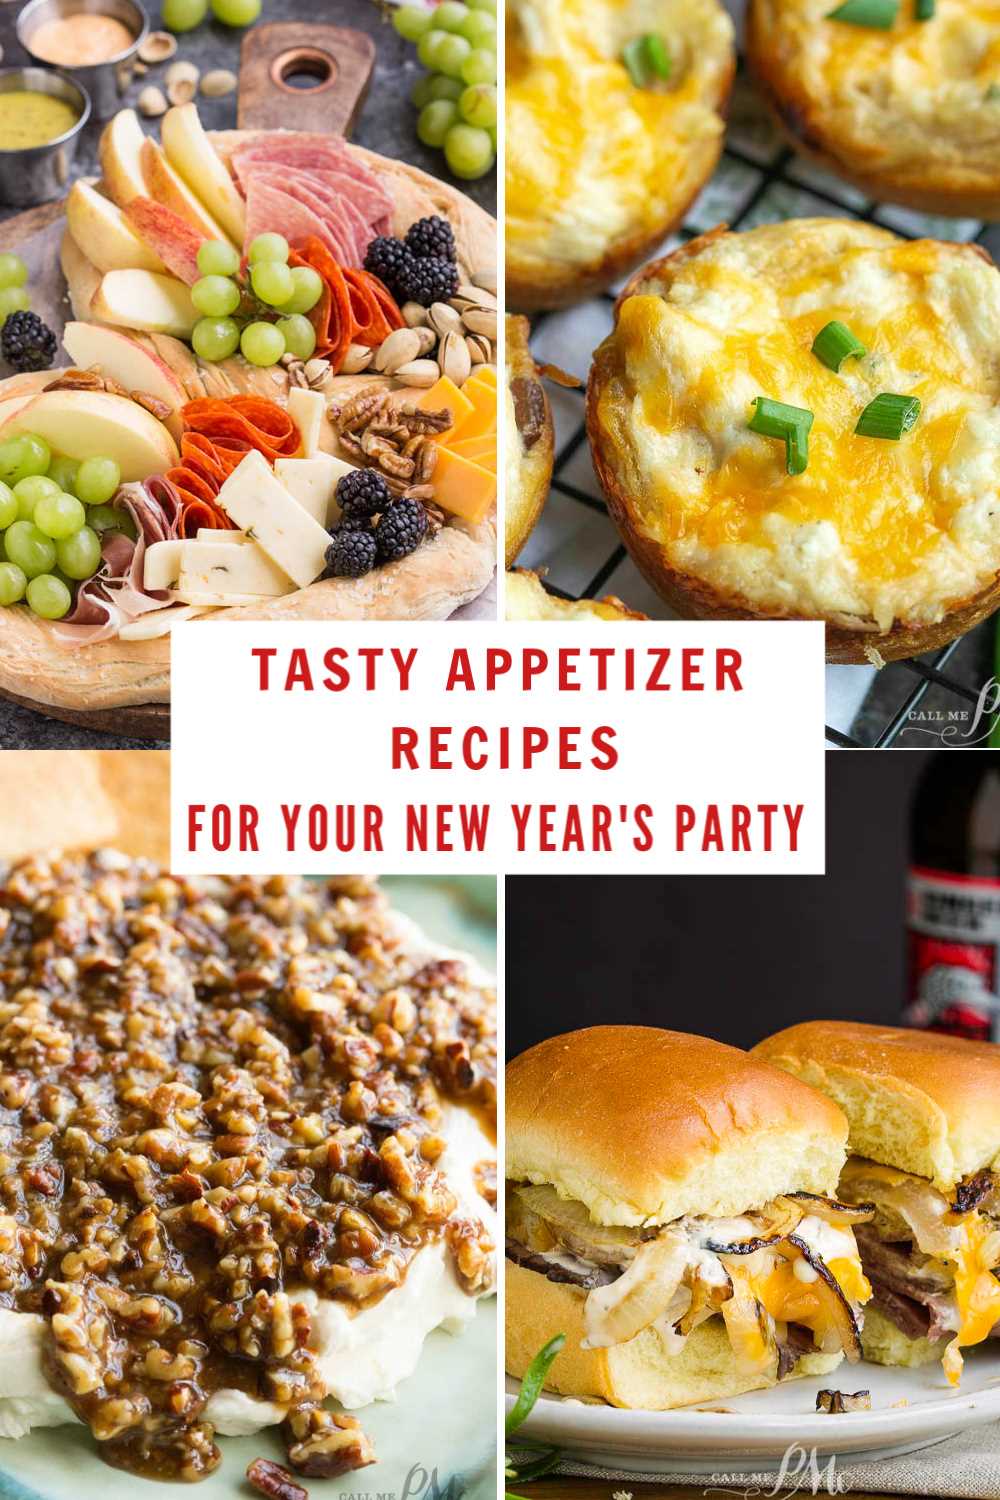 Tasty Appetizers for your New Year